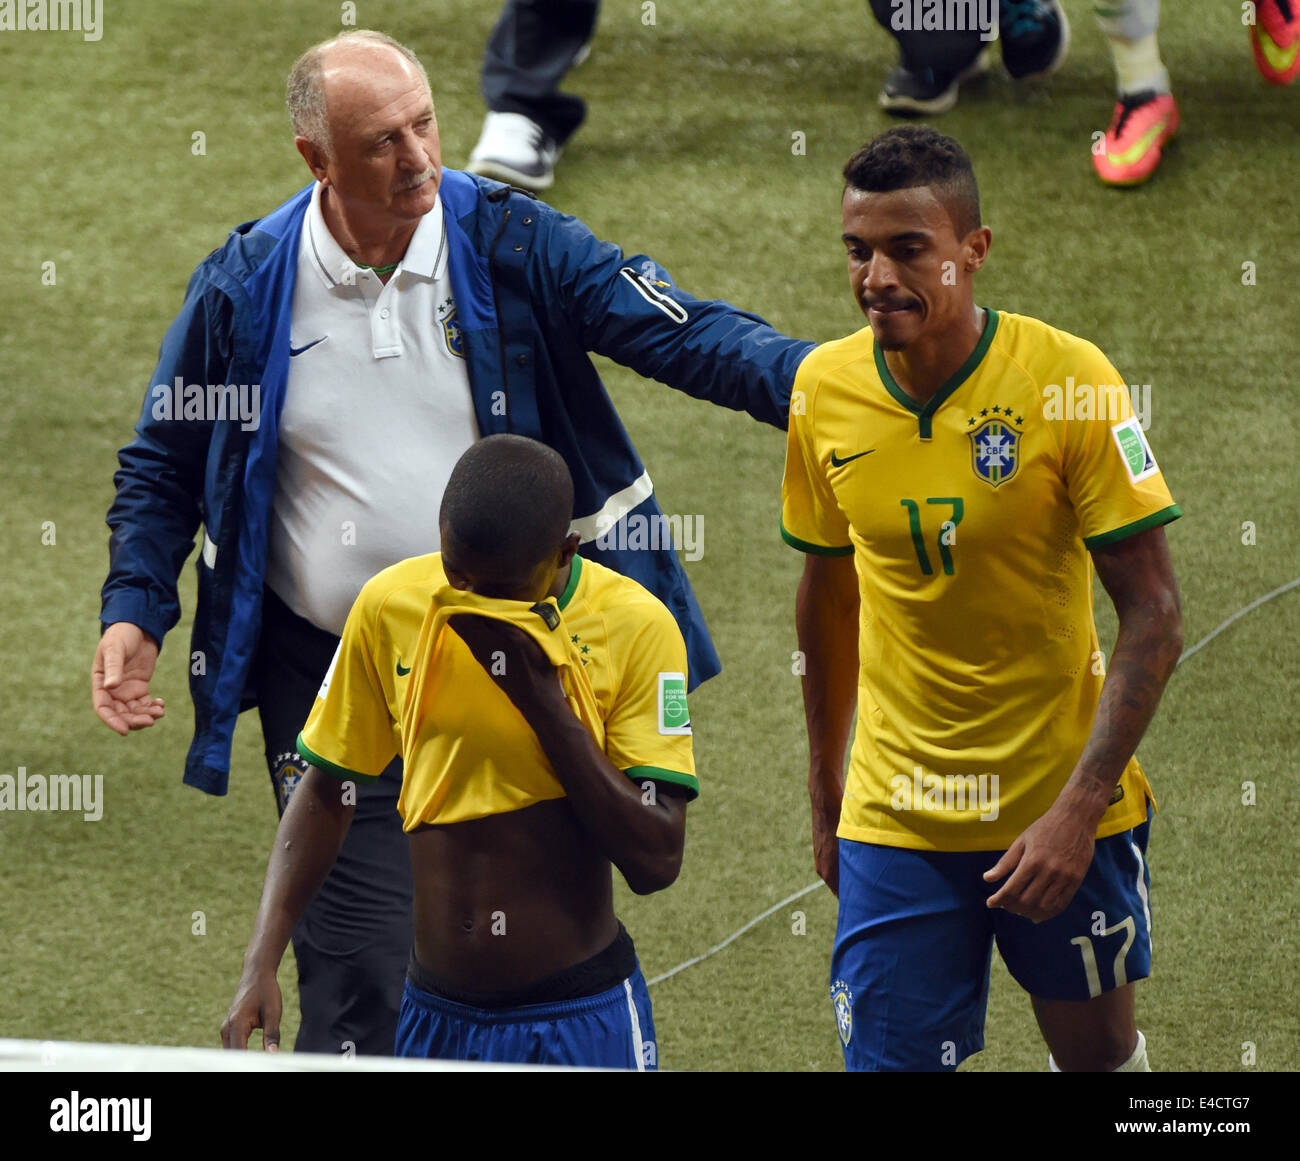 Belo Horizonte, Brazil. 08th July, 2014. Brazil's coach Luiz Felipe Scolari and players Ramires (C) and Luiz Gustavo leave the pitch after the FIFA World Cup 2014 semi-final soccer match between Brazil and Germany at Estadio Mineirao in Belo Horizonte, Brazil, 08 July 2014. Photo: Andreas Gebert/dpa/Alamy Live News Stock Photo